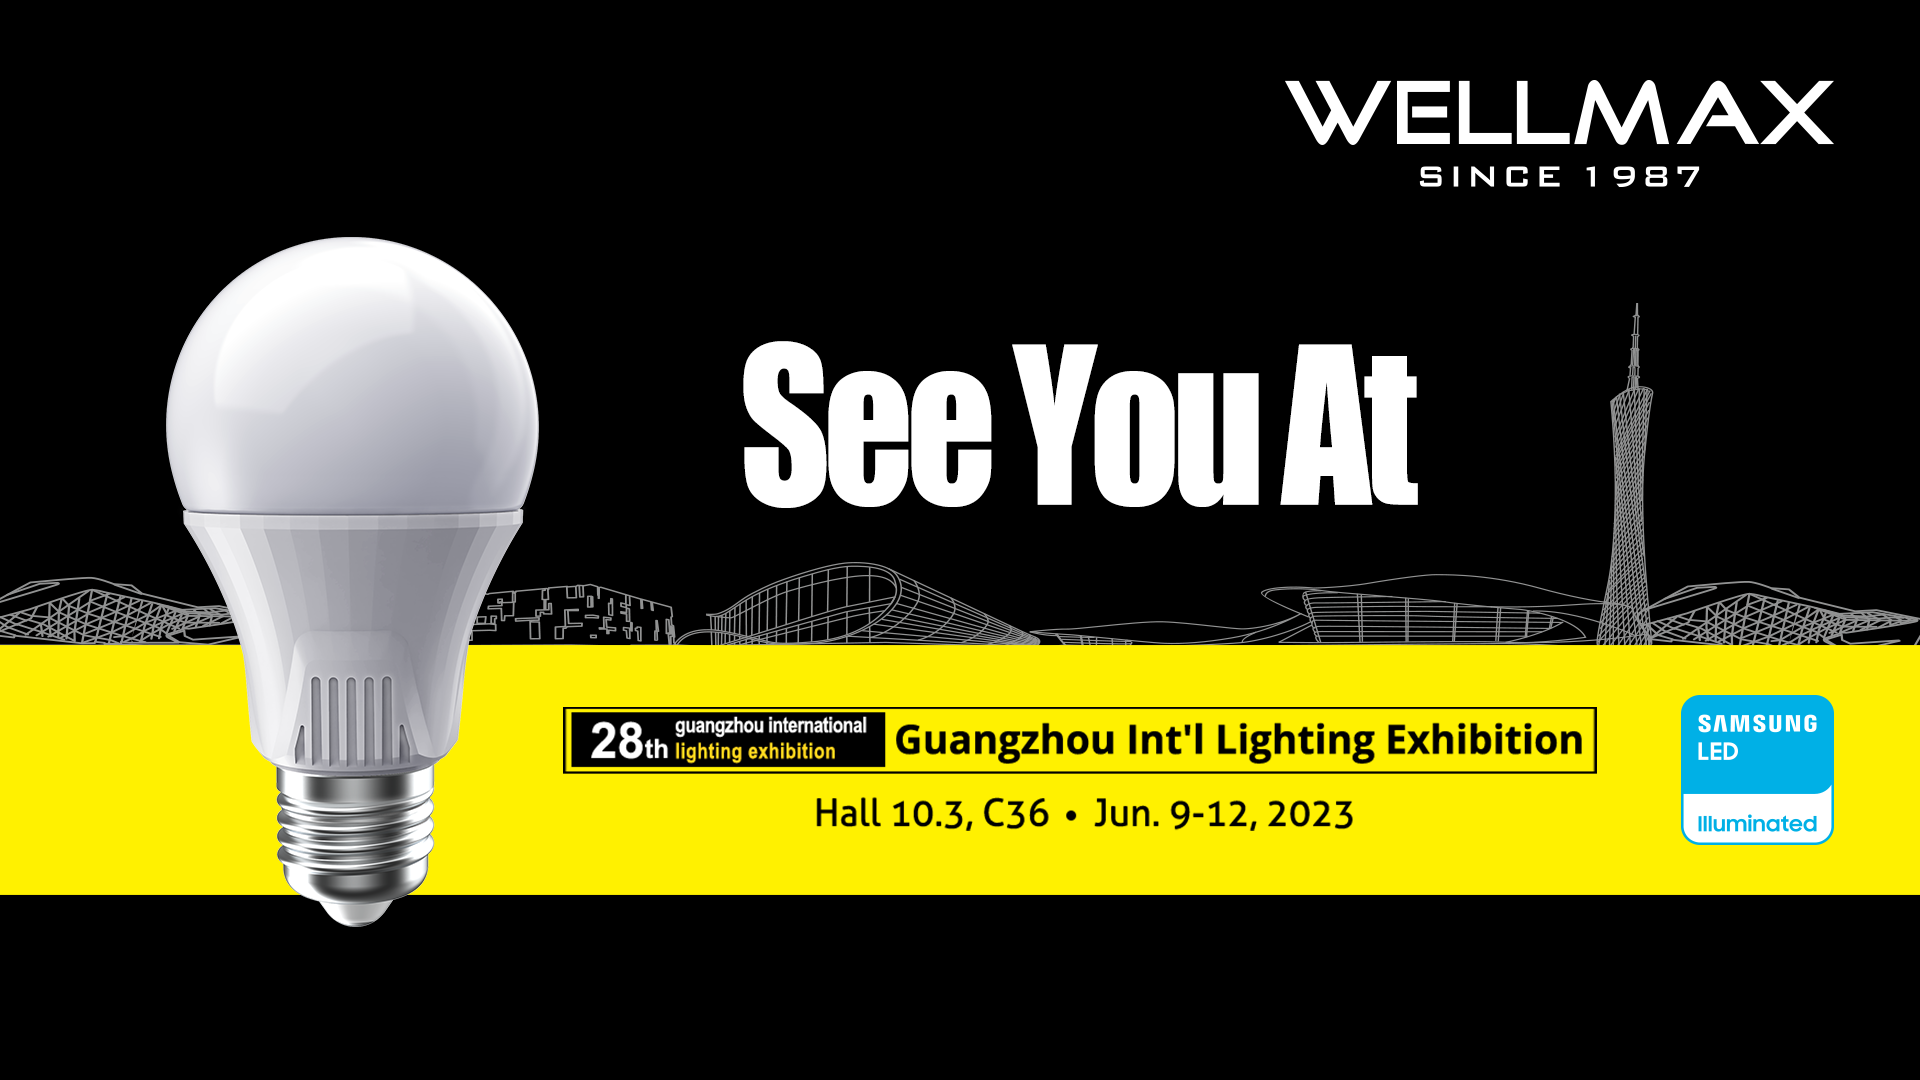 You’ve invited to join us at the Guangzhou Int’l Lighting Exhibition 2023!👋